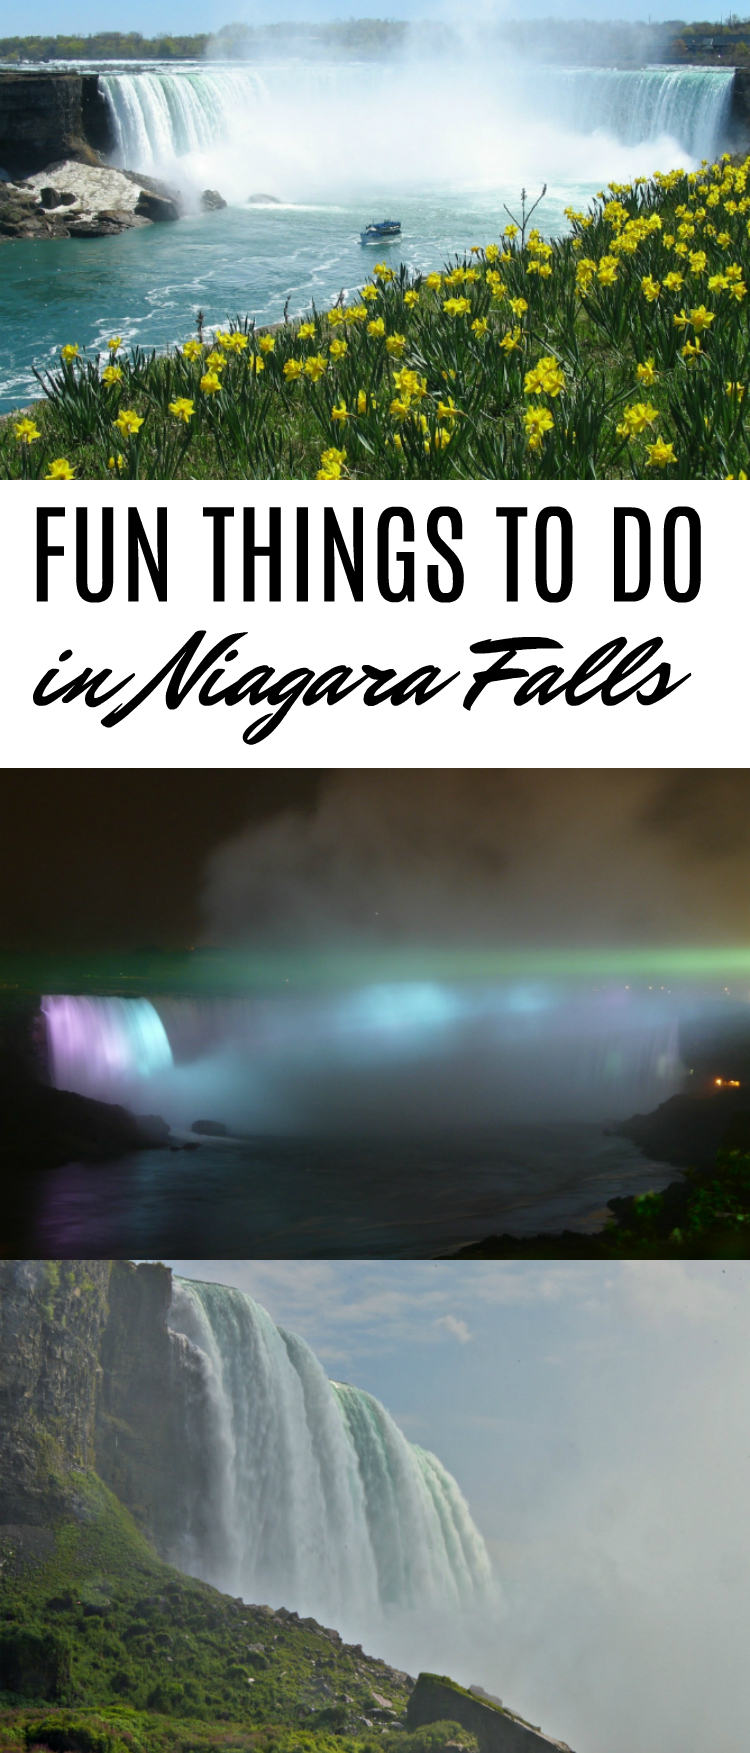 Before you head to Niagara Falls youll want to check out these fun things to do